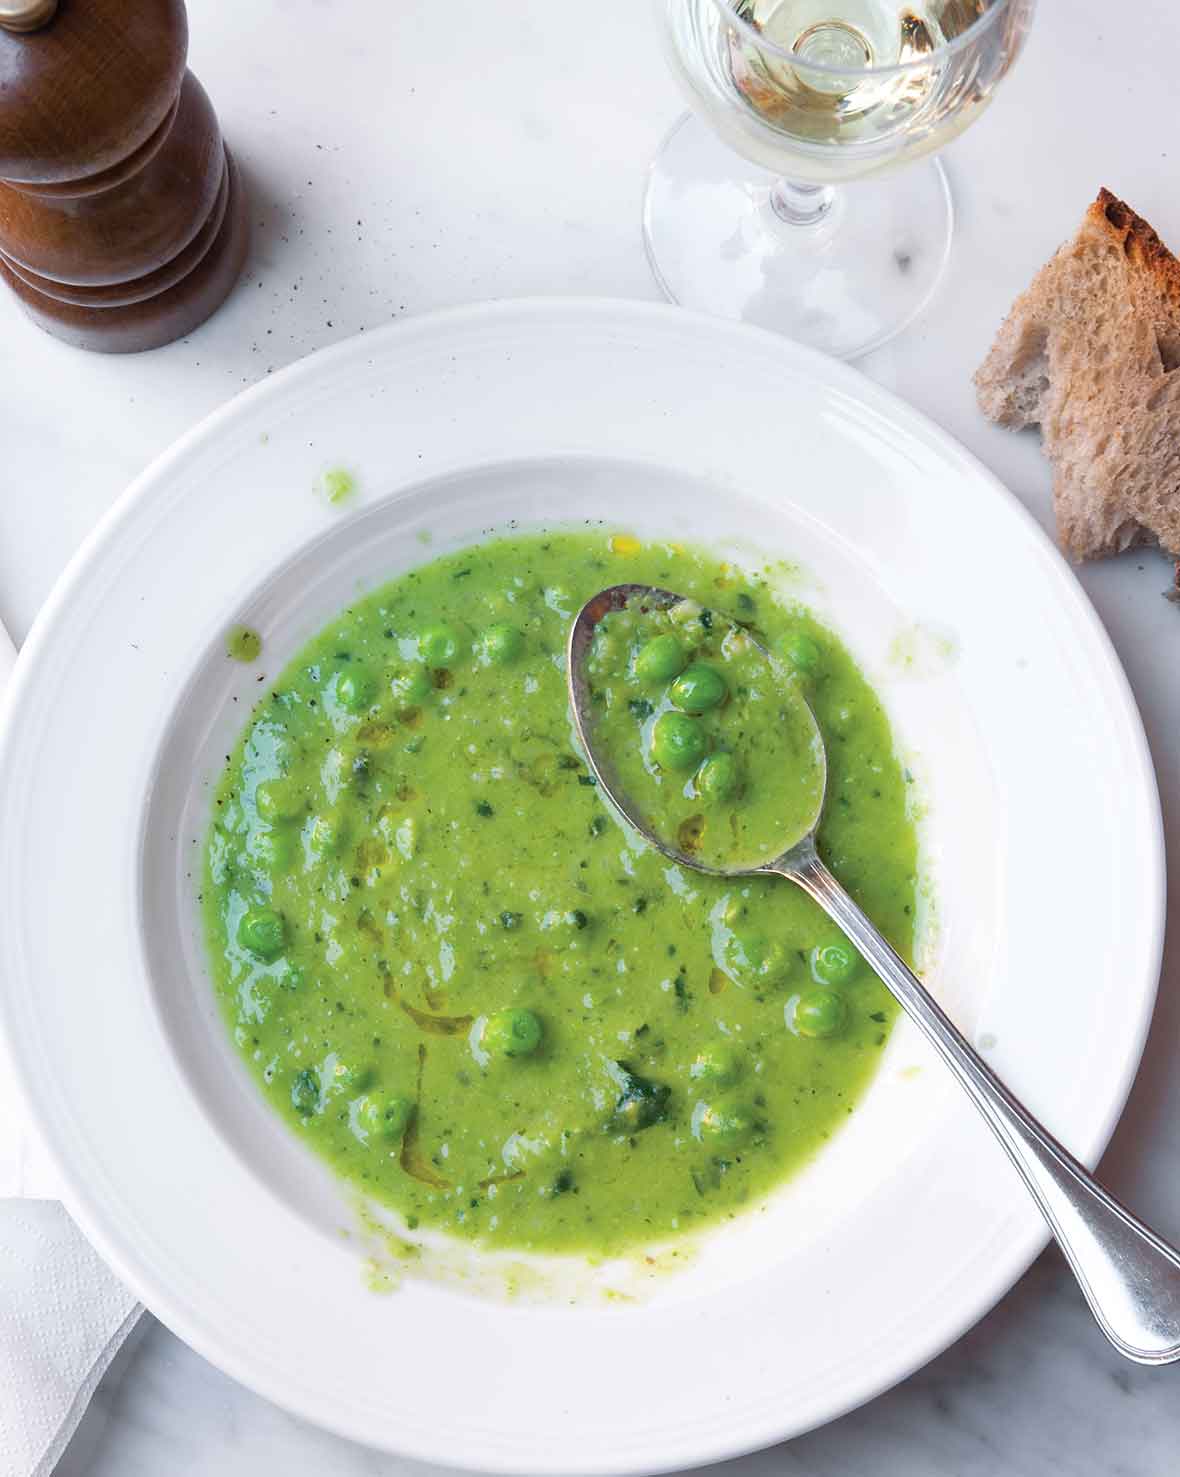 A bowl of pureed pea soup with mint with a spoon resting in the bowl and a glass of wine, piece of bread, and pepper mill beside it.